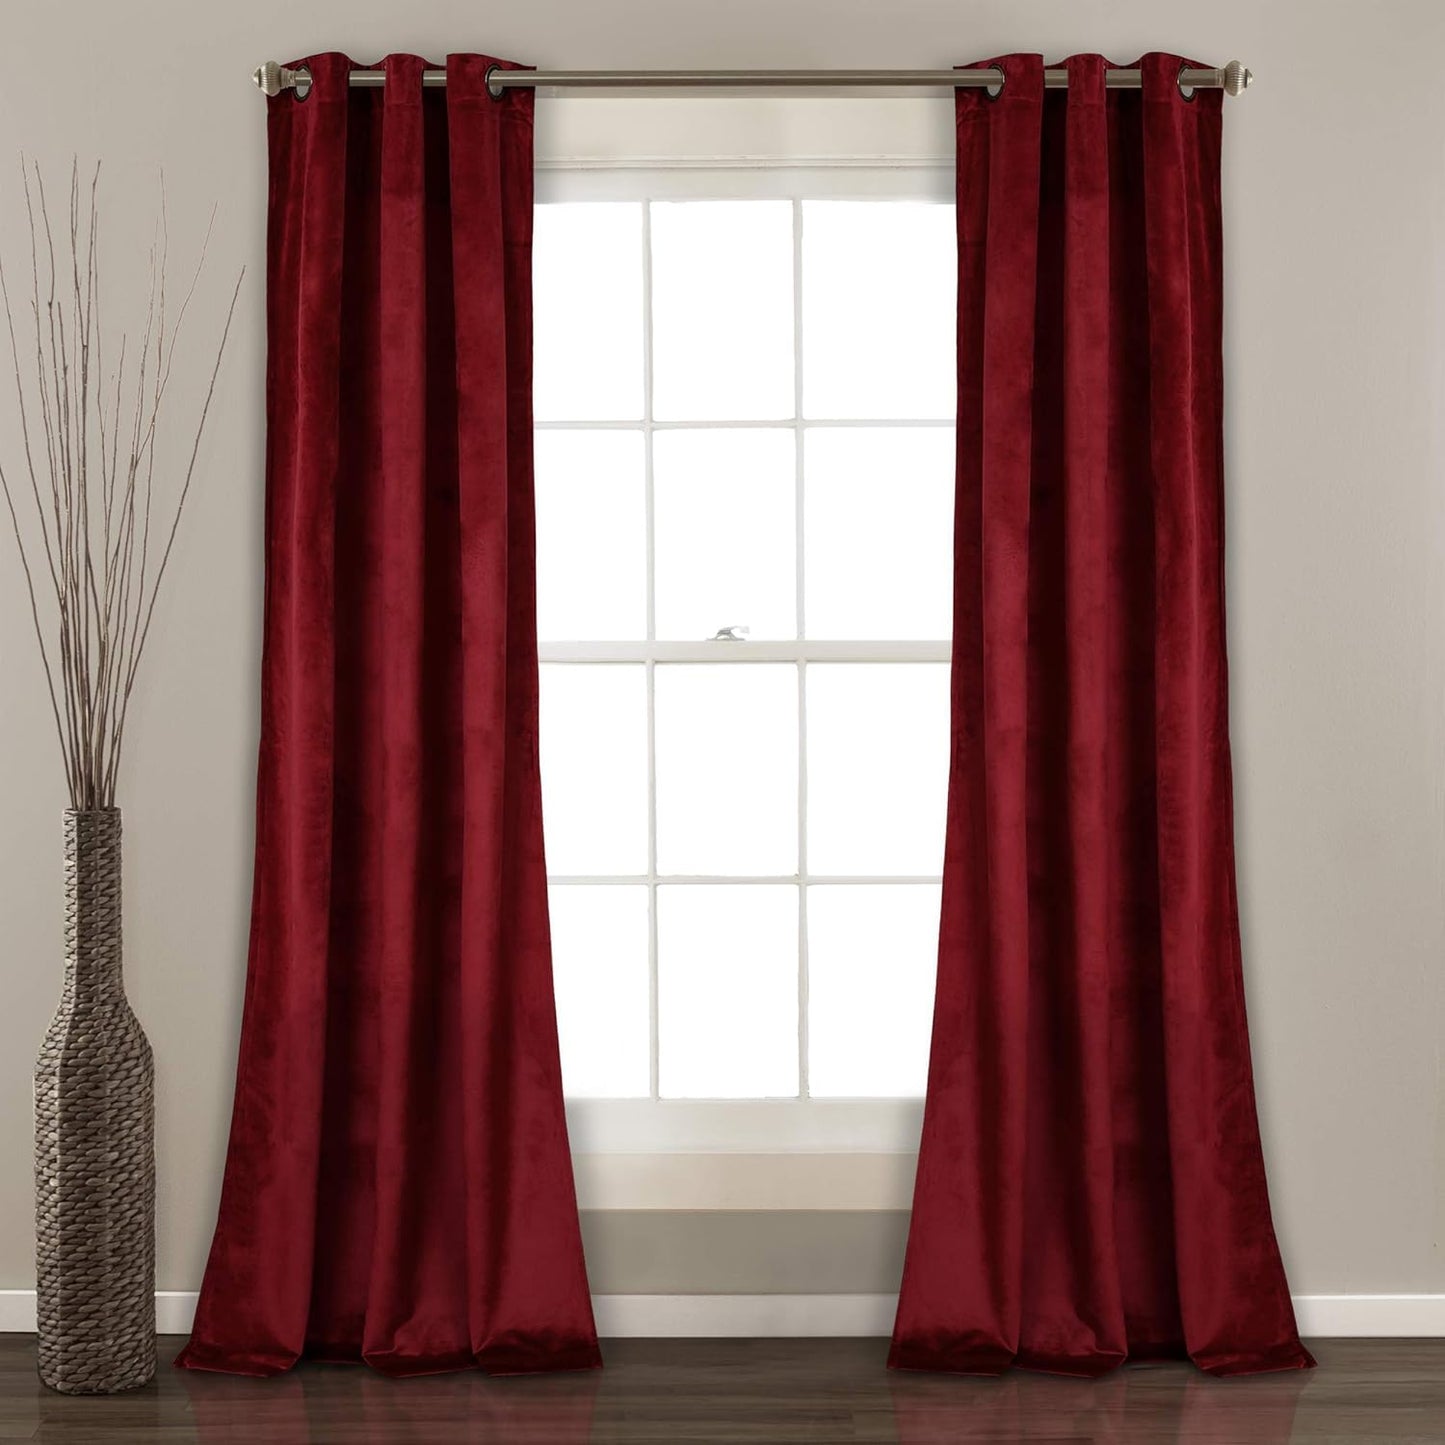 Lush Decor Prima Velvet Curtains Color Block Light Filtering Window Panel Set for Living, Dining, Bedroom (Pair), 38" W X 84" L, Navy  Triangle Home Fashions Red Room Darkening 38"W X 95"L